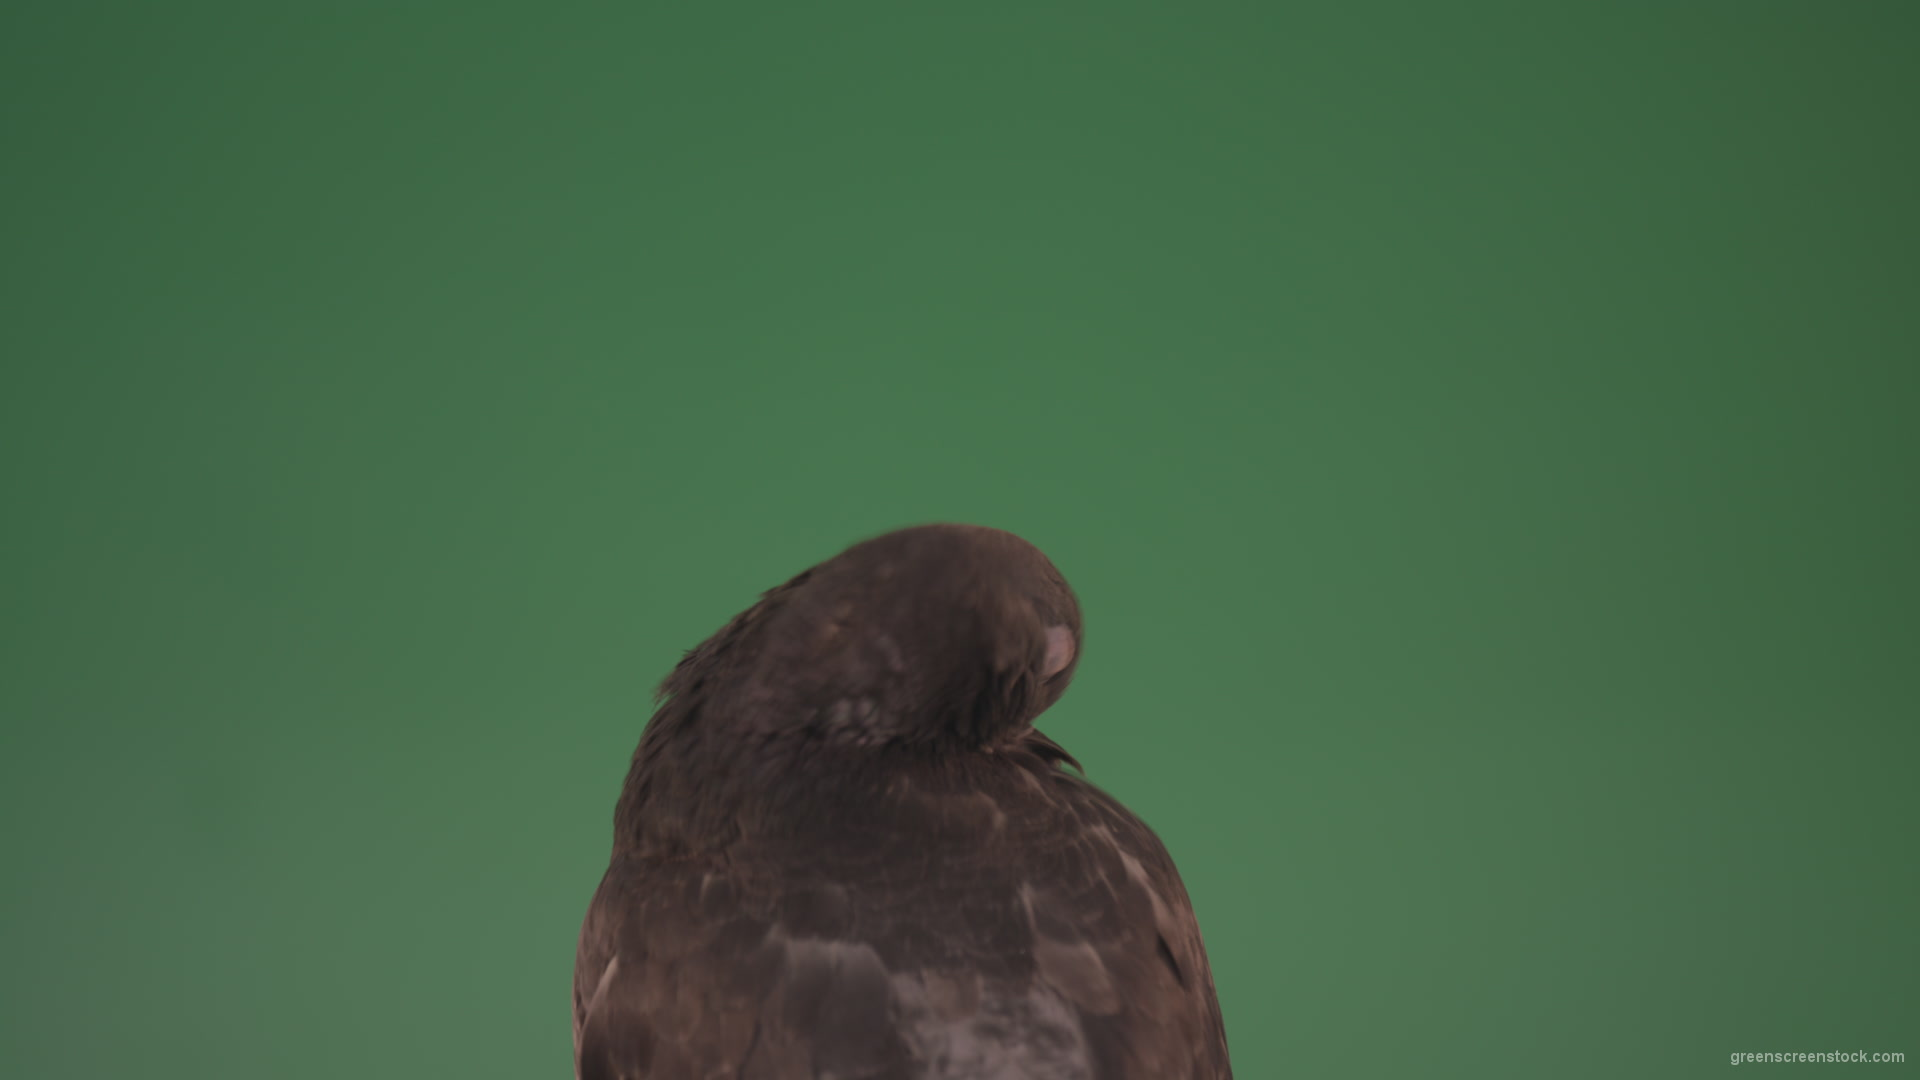 Sitting-wings-to-the-chicken-bird-home-pigeon-isolated-on-chromakey-background_009 Green Screen Stock